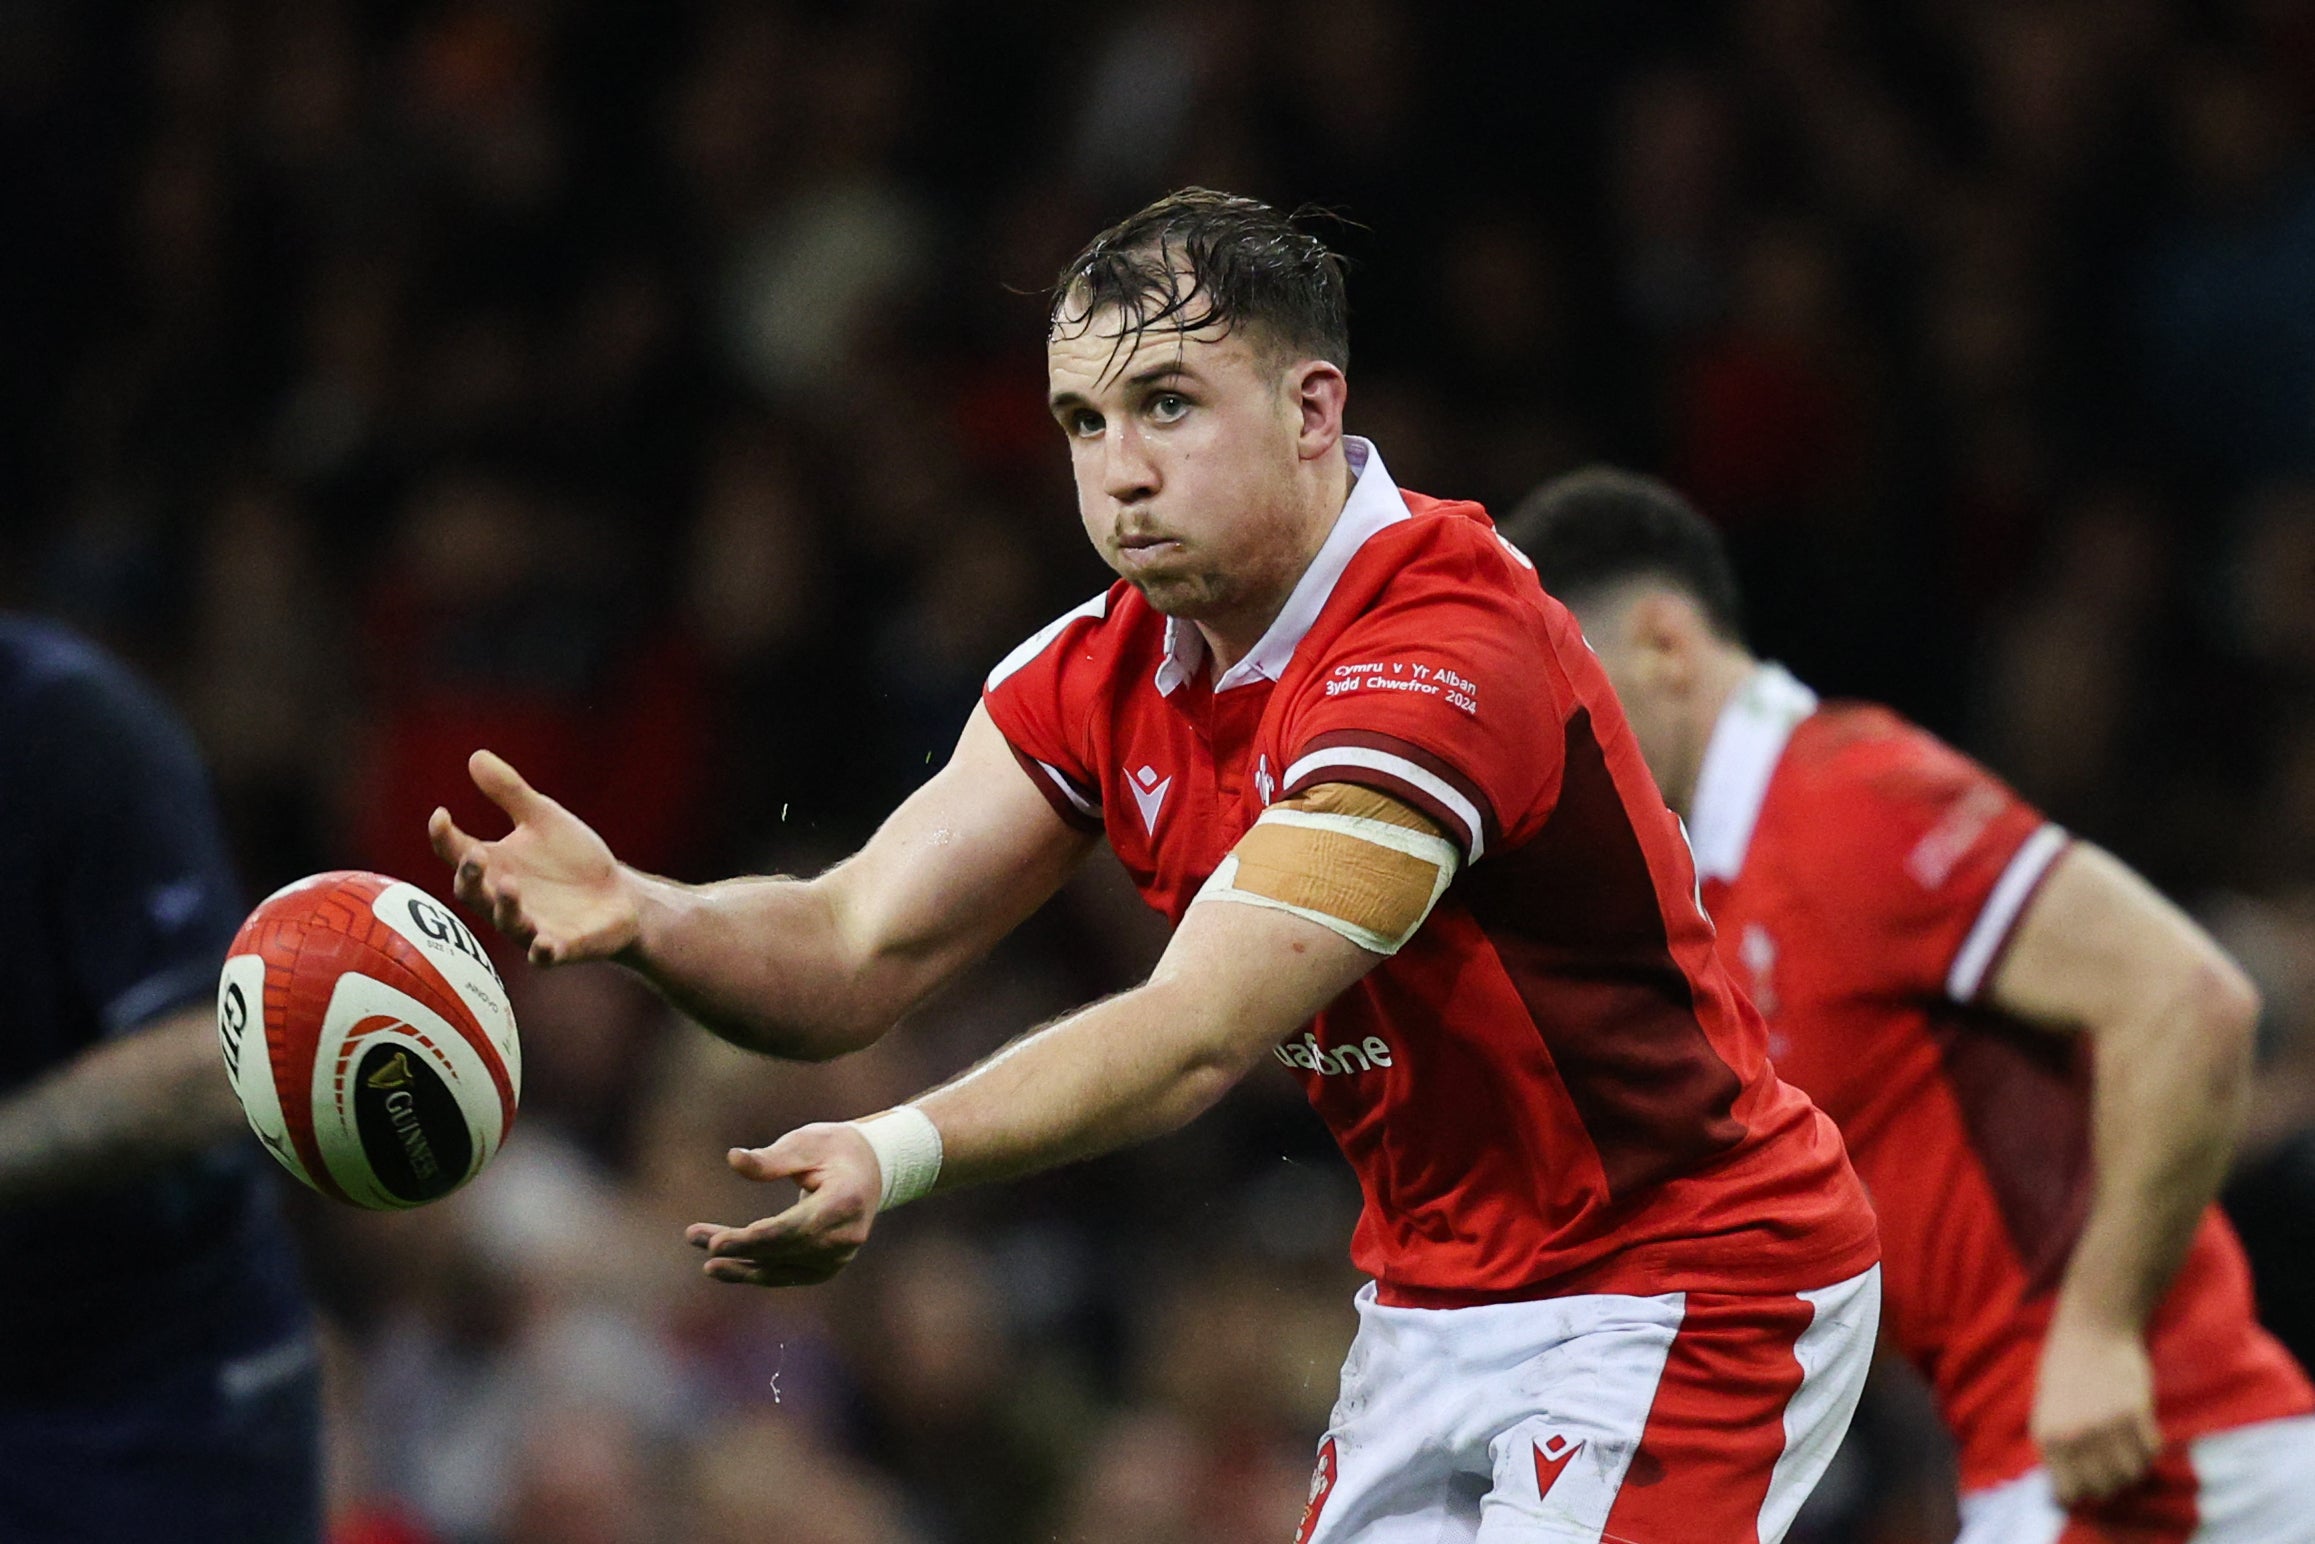 Ioan Lloyd will be asked to dictate Wales’ play as the starting fly half